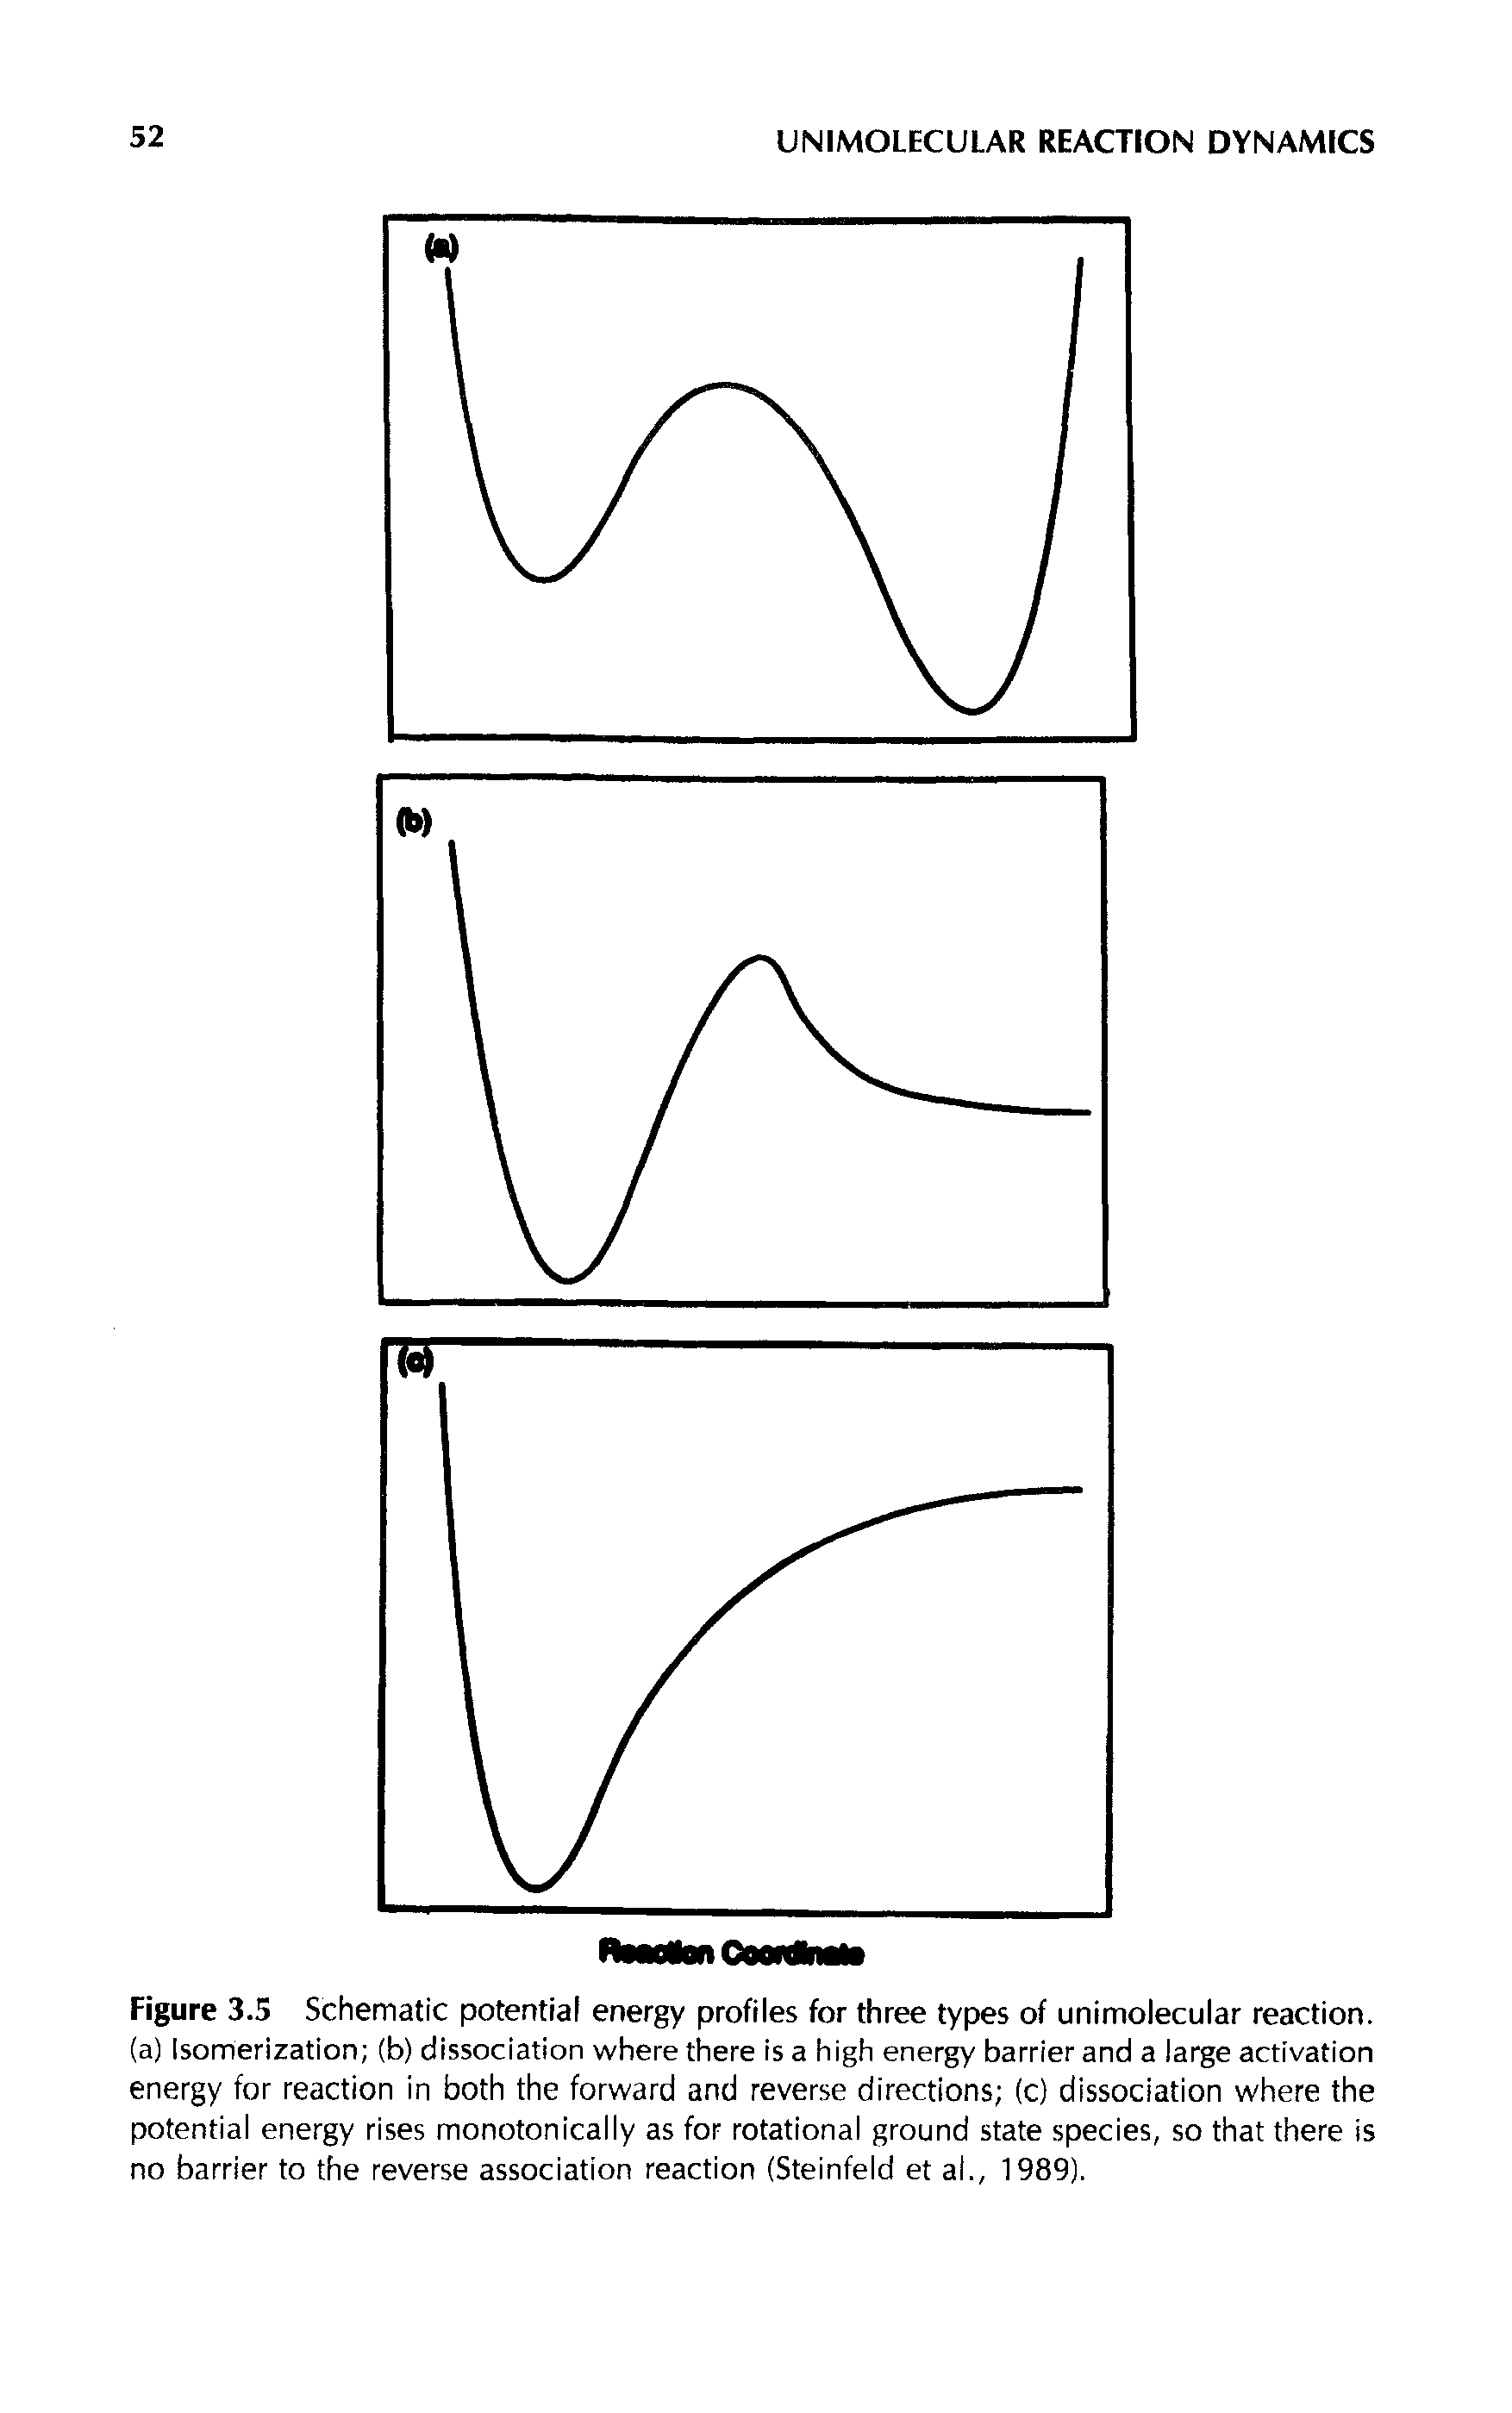 Figure 3.5 Schematic potential energy profiles for three types of unimolecular reaction, (a) Isomerization (b) dissociation where there is a high energy barrier and a large activation energy for reaction in both the forward and reverse directions (c) dissociation where the potential energy rises monotonically as for rotational ground state species, so that there is no barrier to the reverse association reaction (Steinfeld et al., 1989).